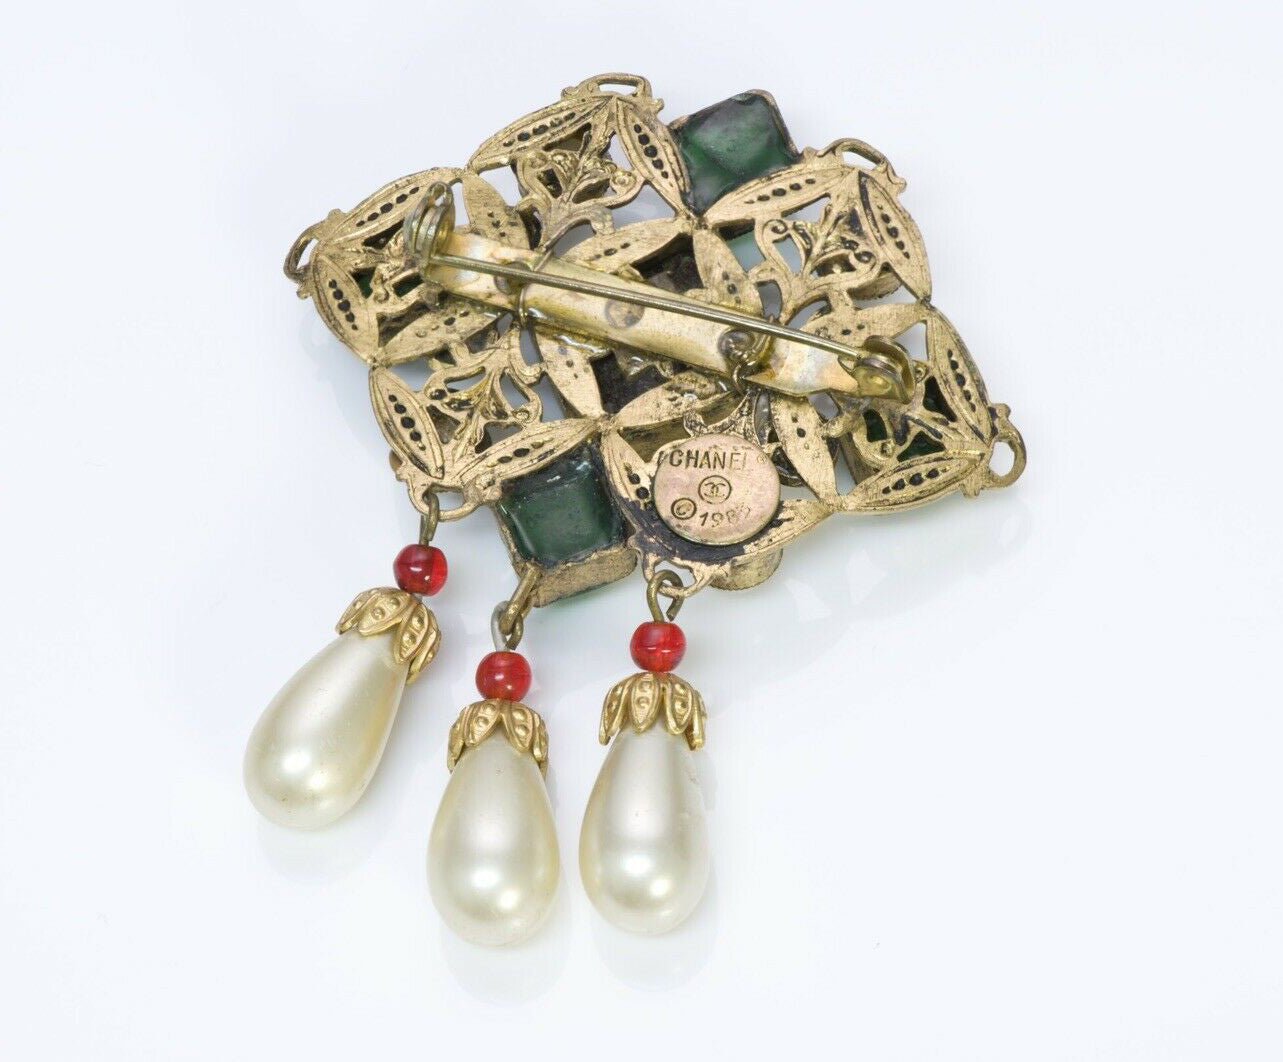 CHANEL Couture 1983 Maison Gripoix Byzantine Glass Pearl Brooch